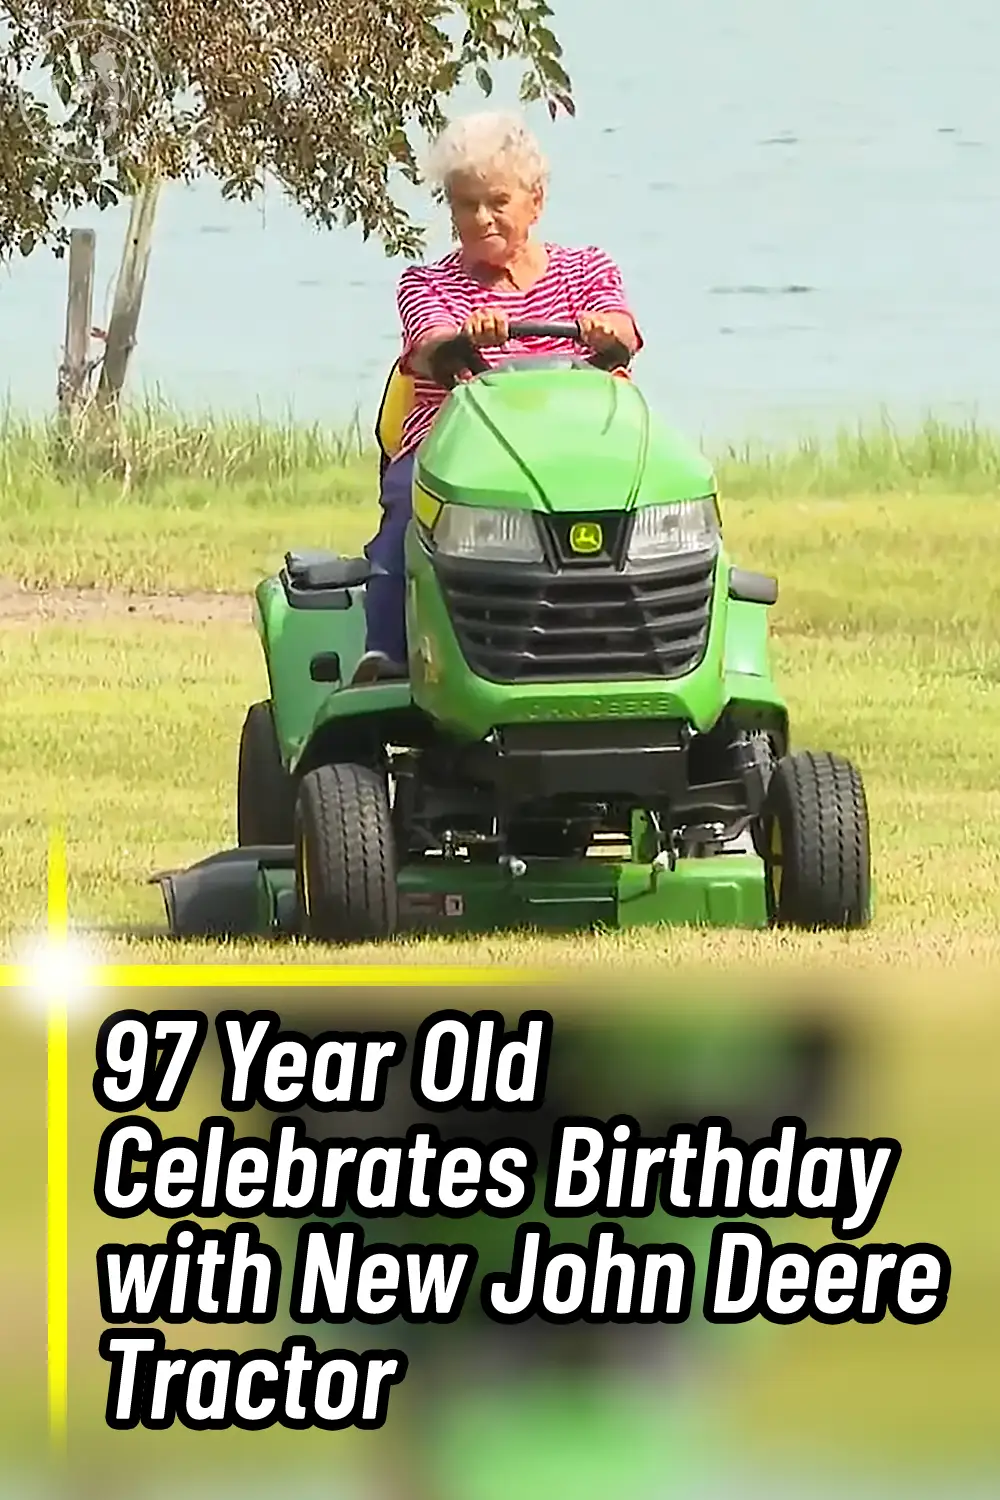 97 Year Old Celebrates Birthday with New John Deere Tractor